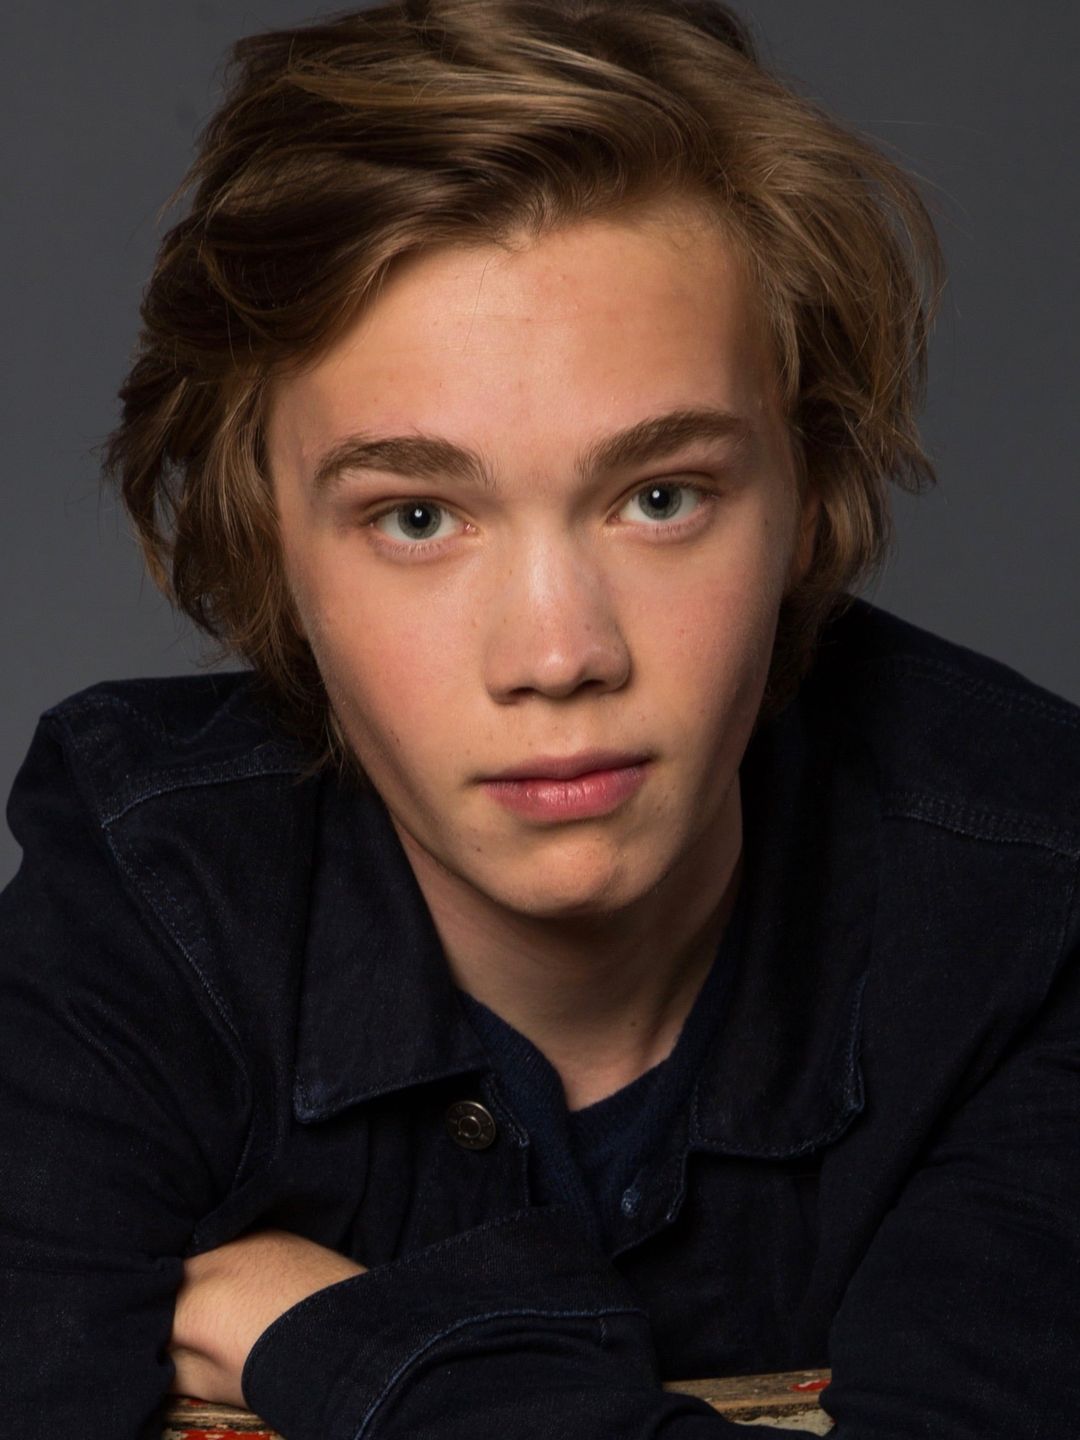 Charlie Plummer who is his mother